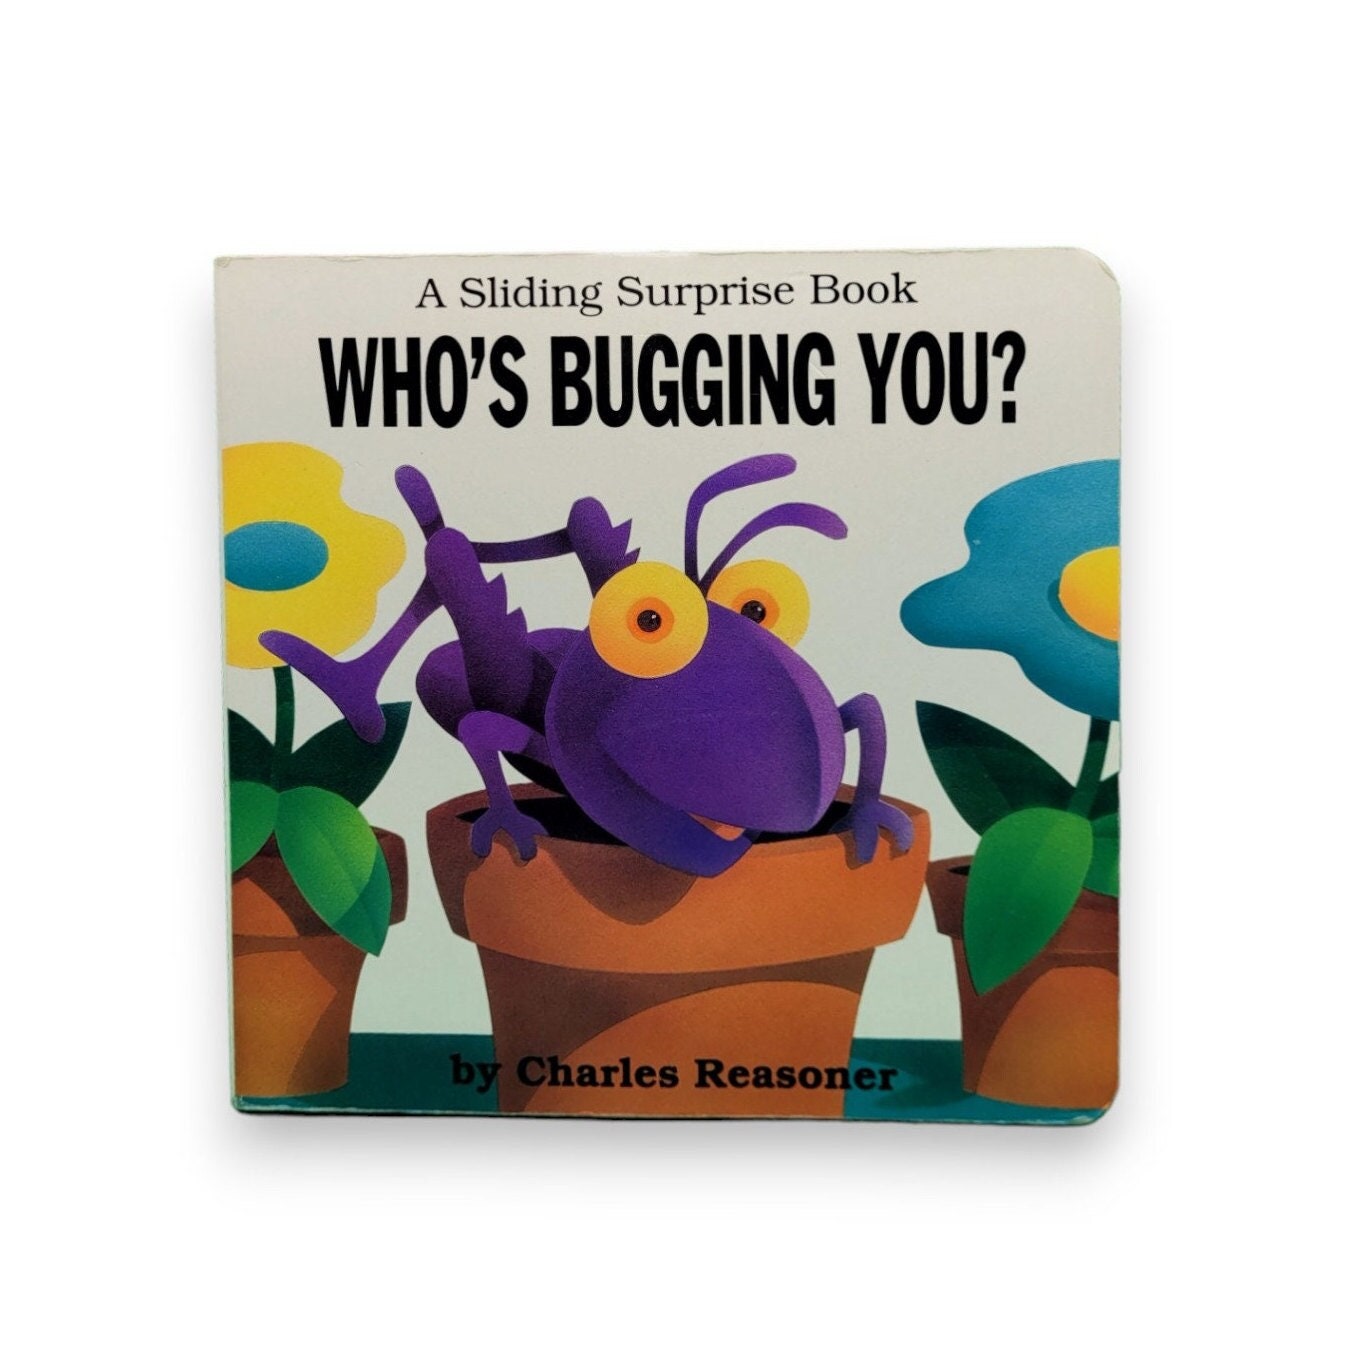 Who's Bugging You? (A Sliding Surprise Book) by Charles Reasoner 1997